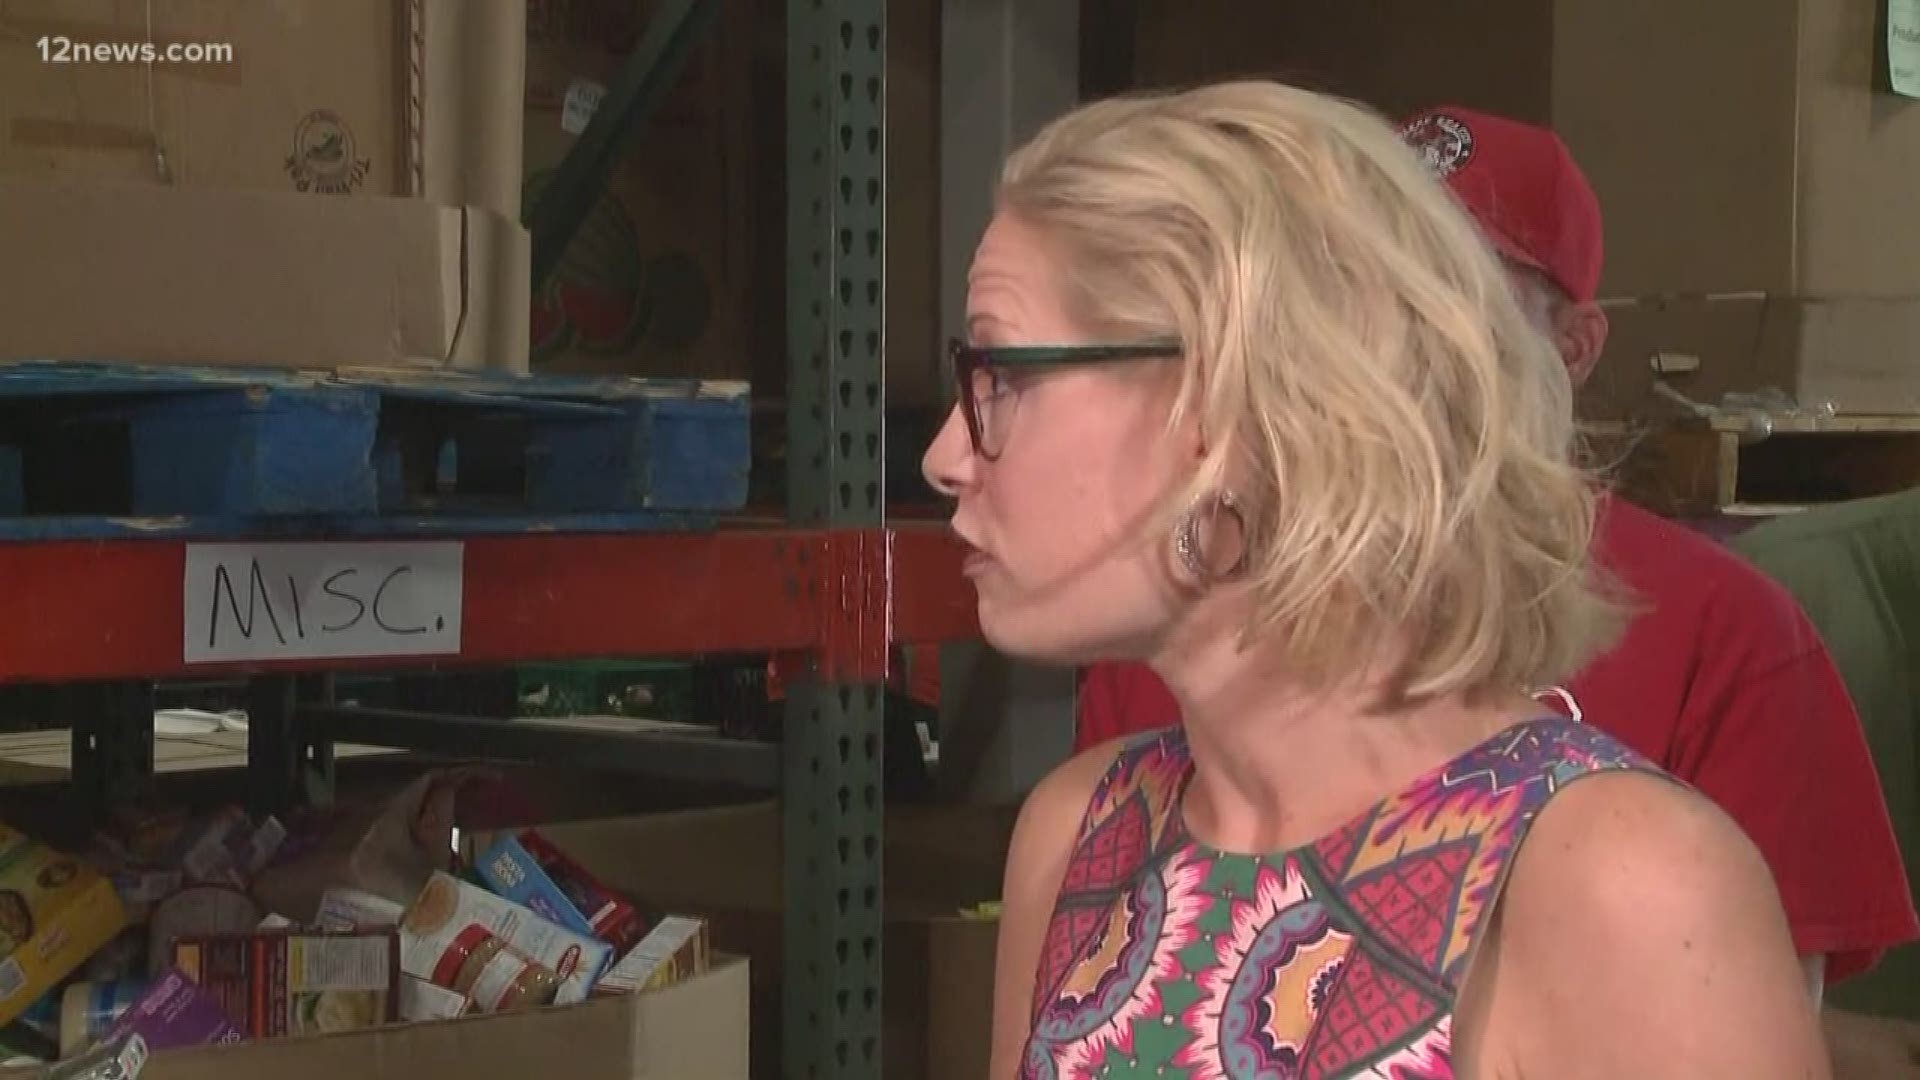 As President Trump is in the Valley to stump for Martha McSally Senate candidate Kyrsten Sinema is making three campaign stops. At one of those stops she talked about her position on healthcare.